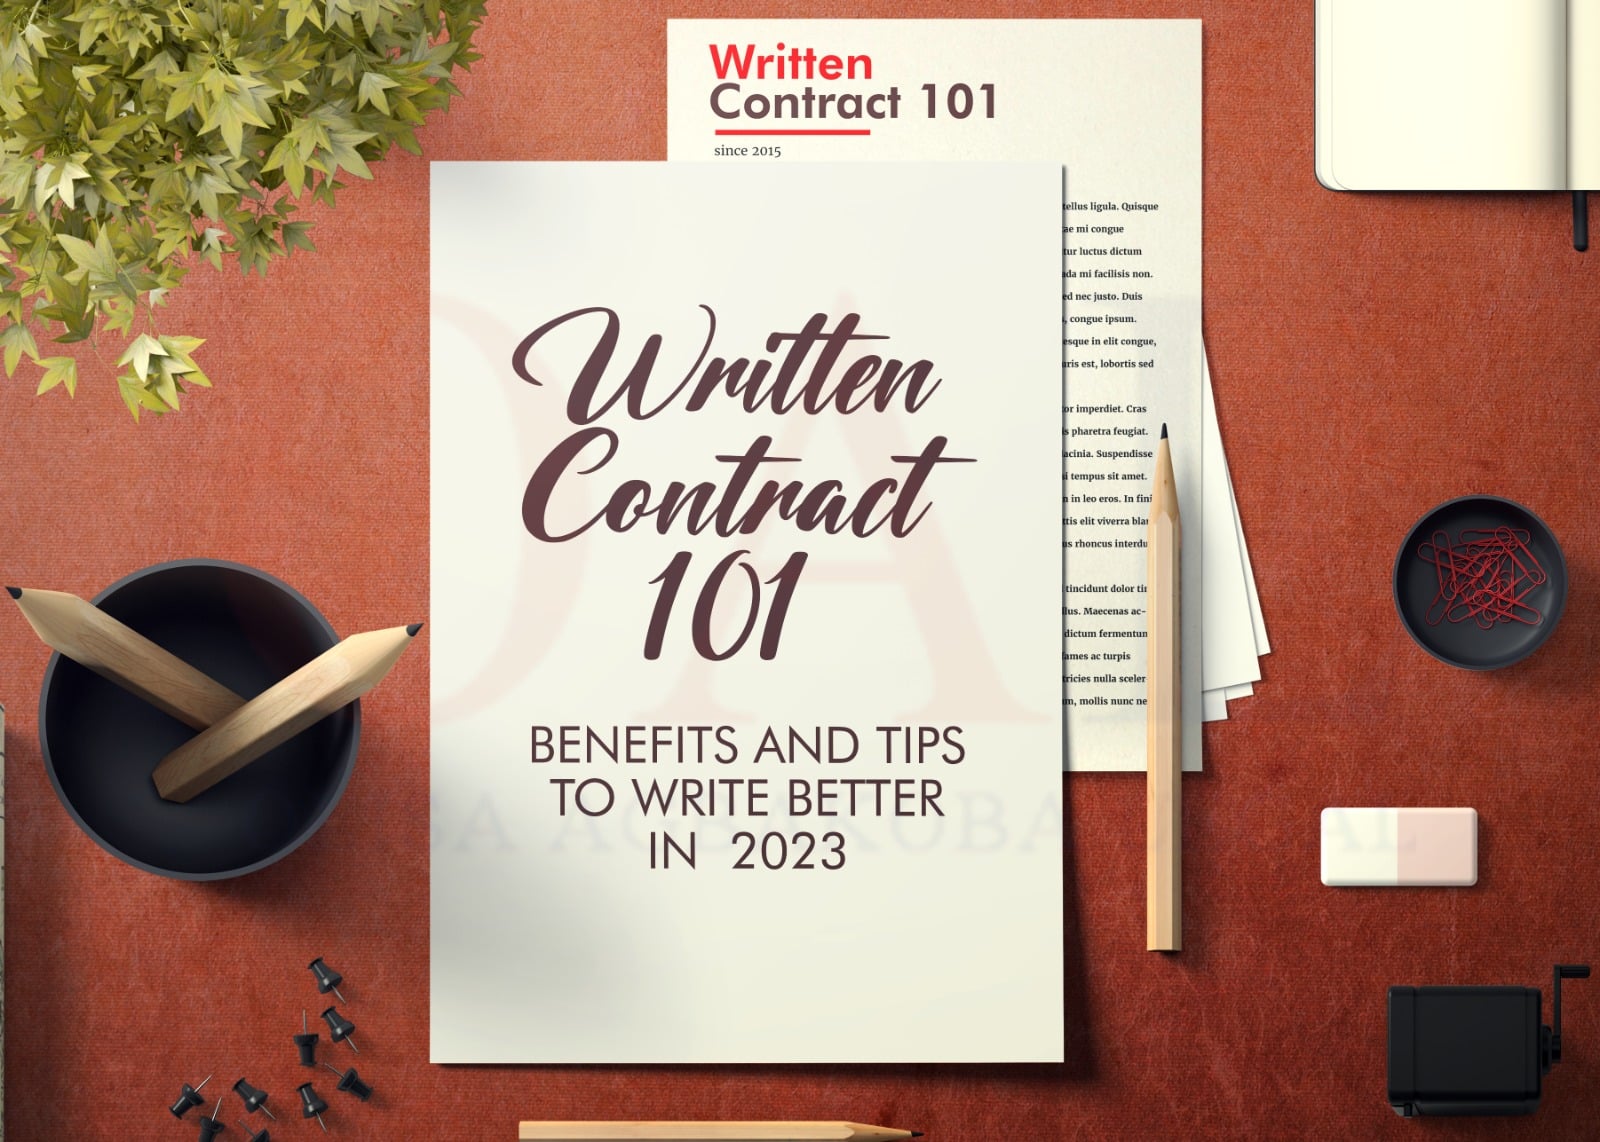 Written Contracts 101 – Benefits and Tips to Write Better in 2023 by Olisa Agbakoba Legal (OAL).